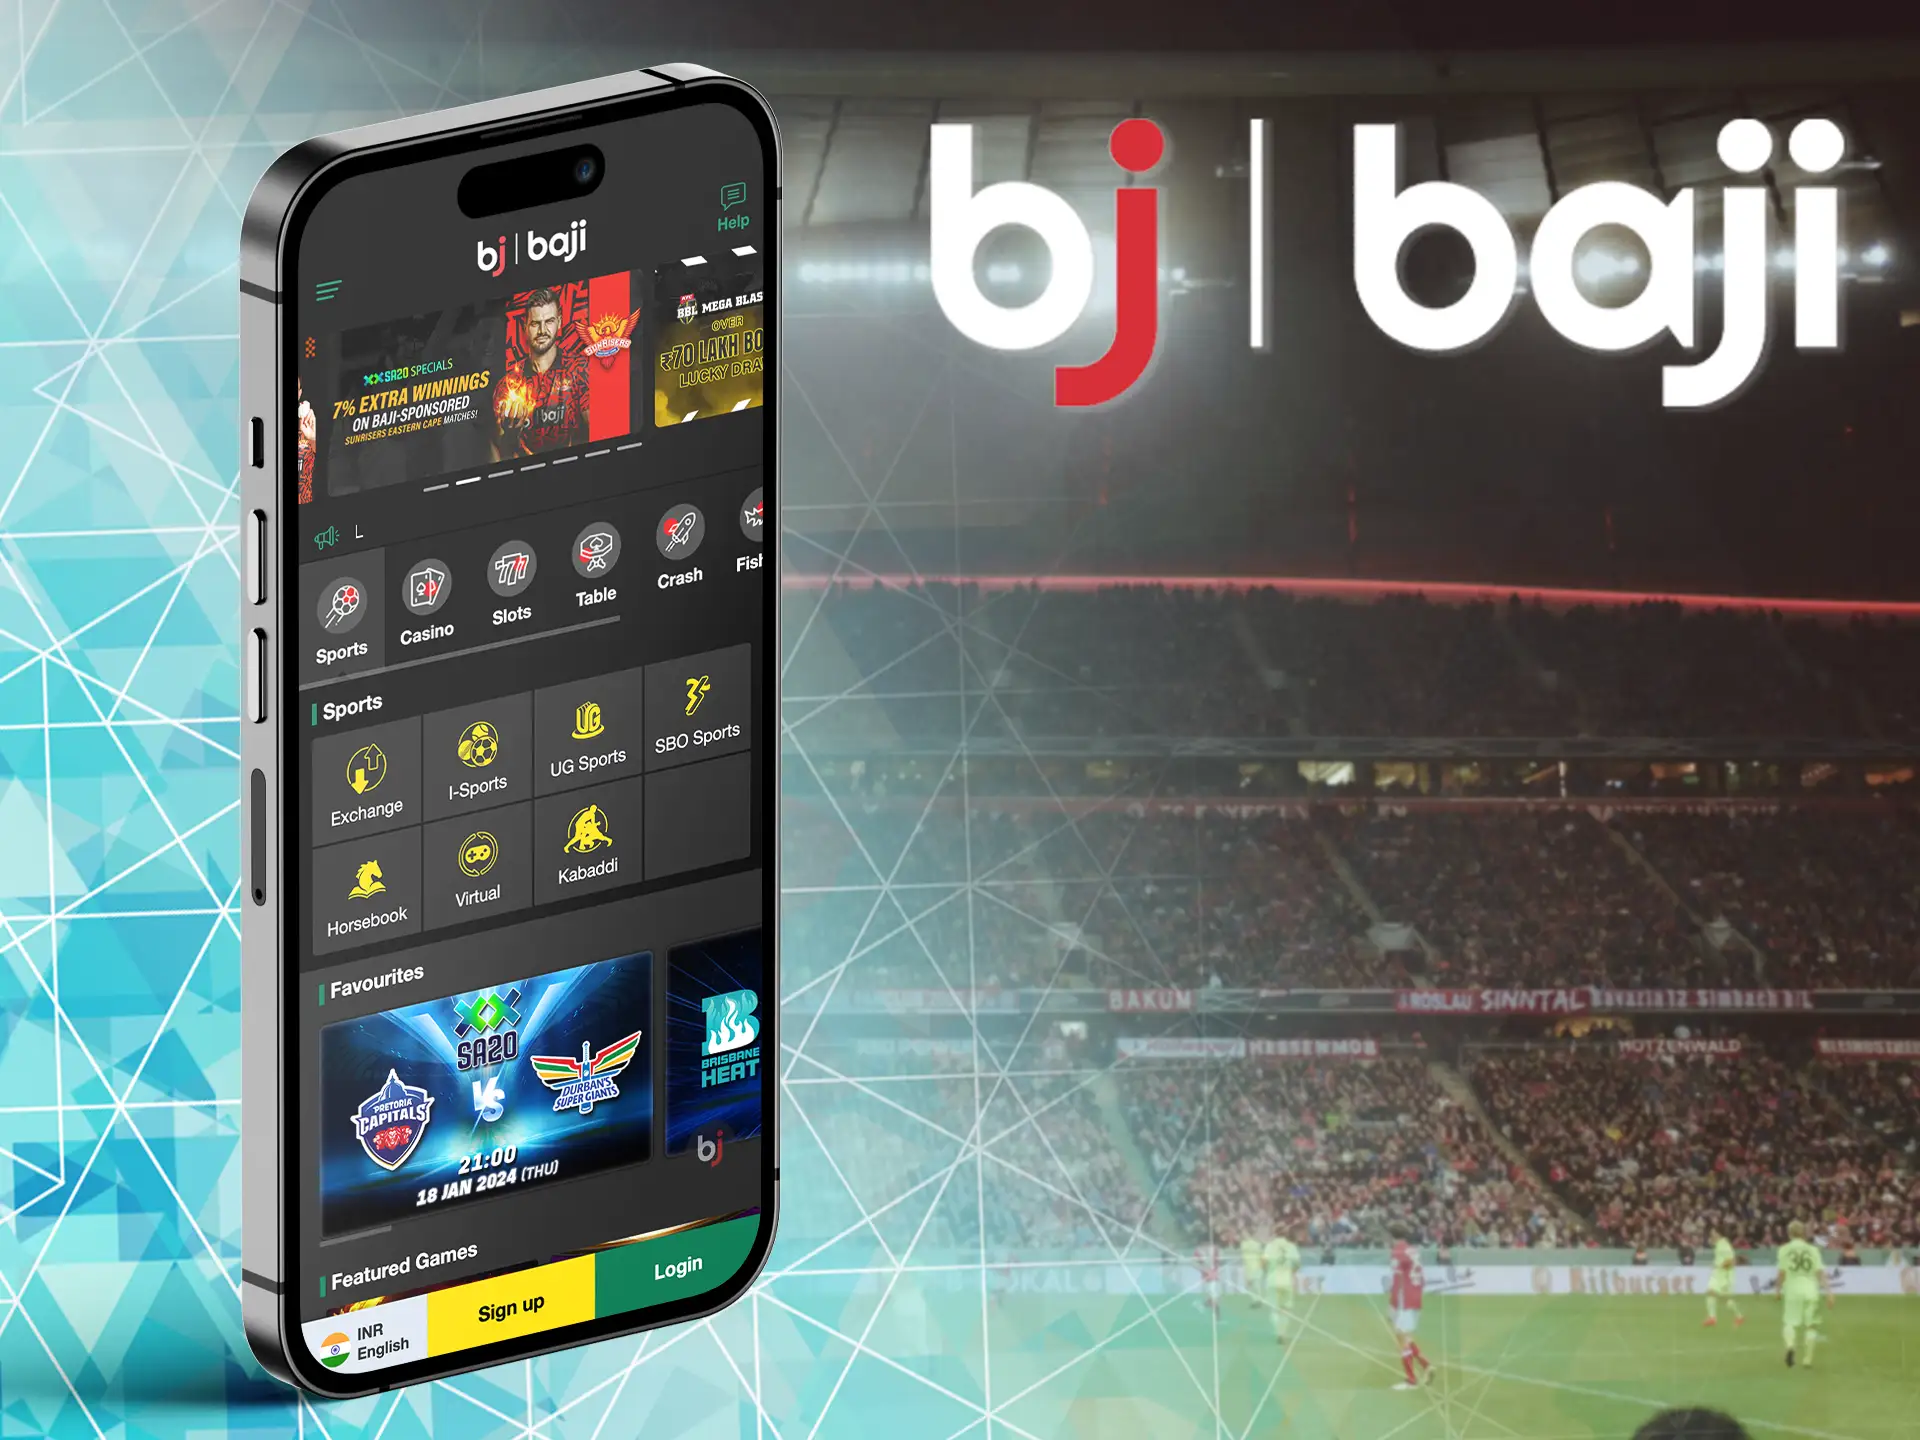 Place bets on bet online football in the Baji app.